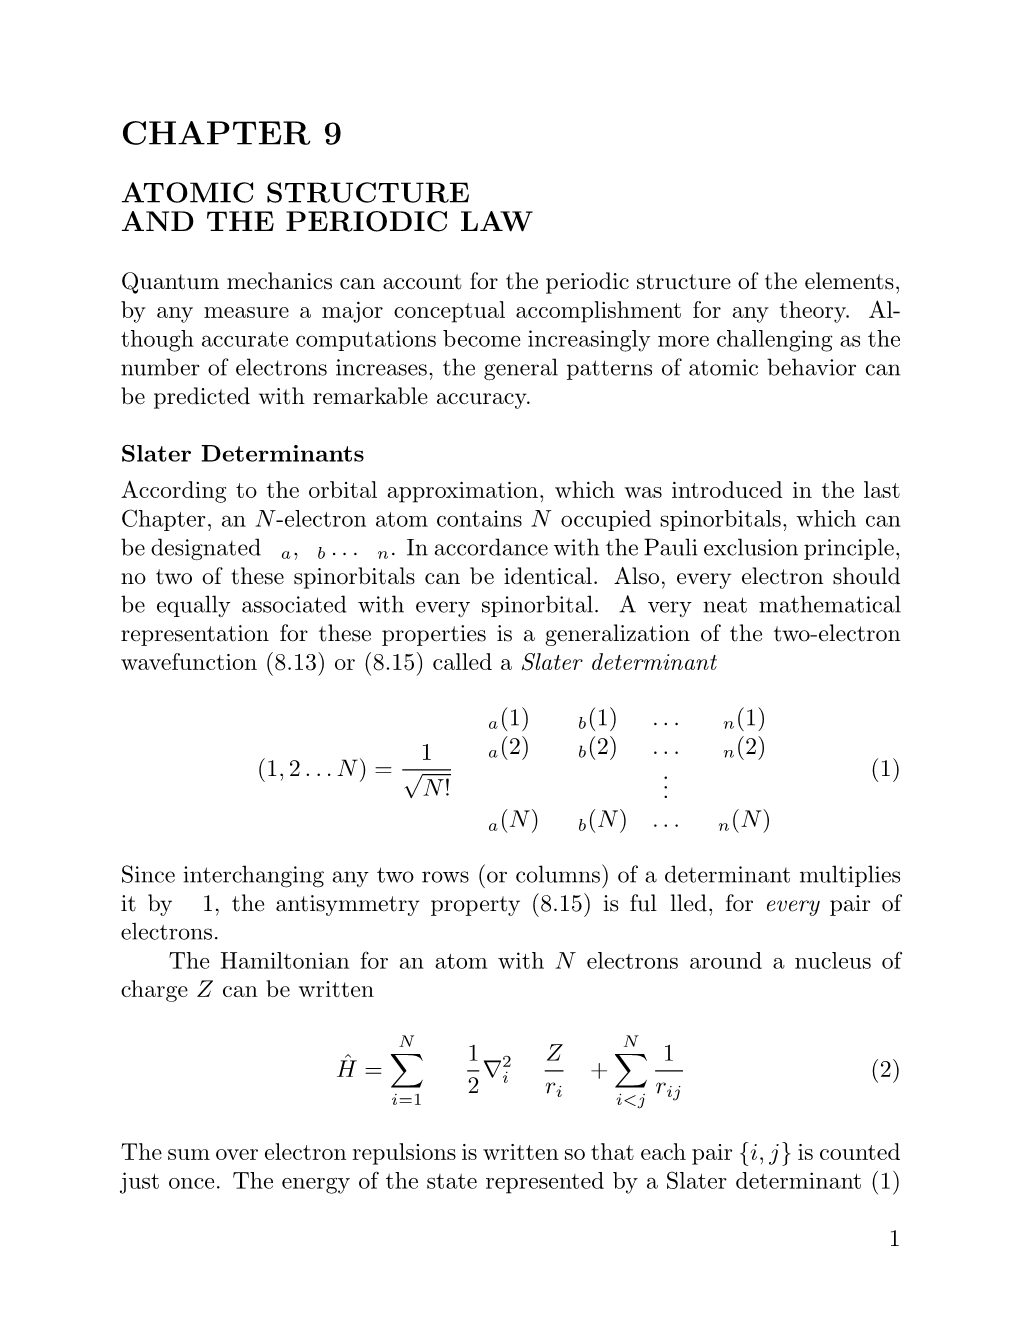 Chapter 9 Atomic Structure and the Periodic Law